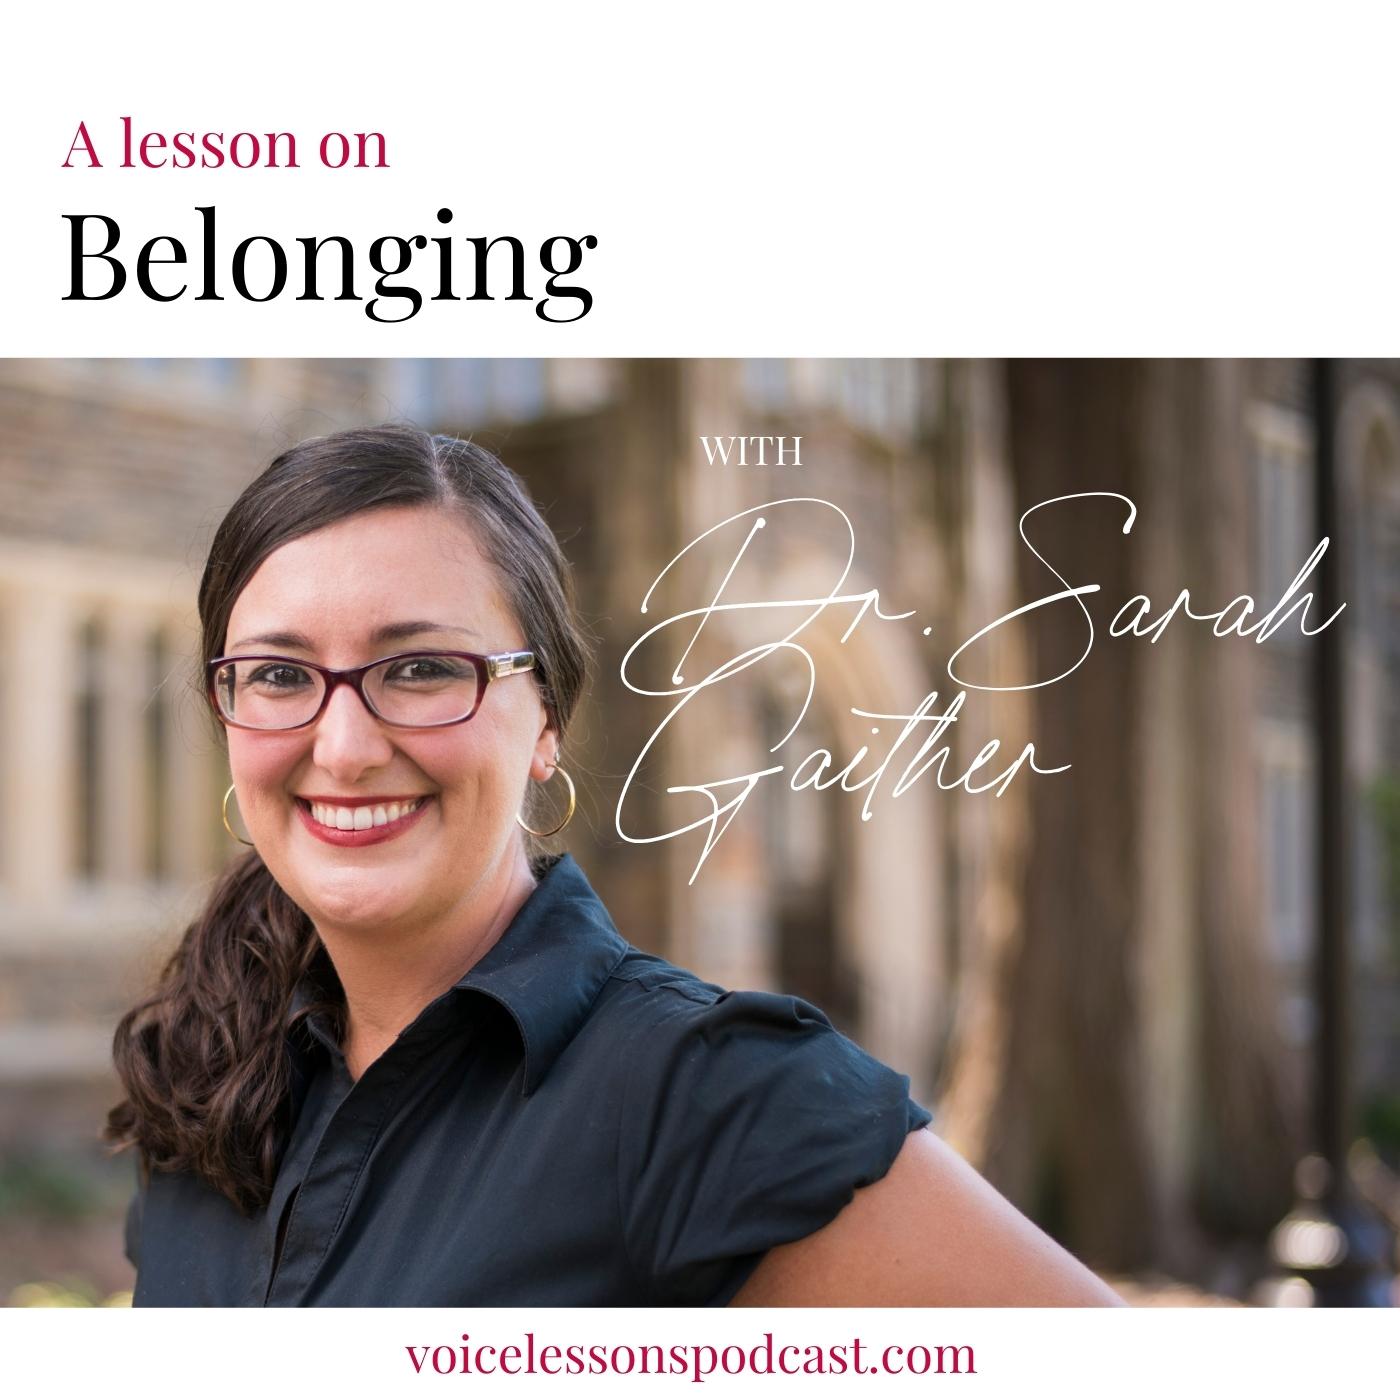 A_Voice_Lesson_On_Belonging_with_Dr_Sarah_Gaither